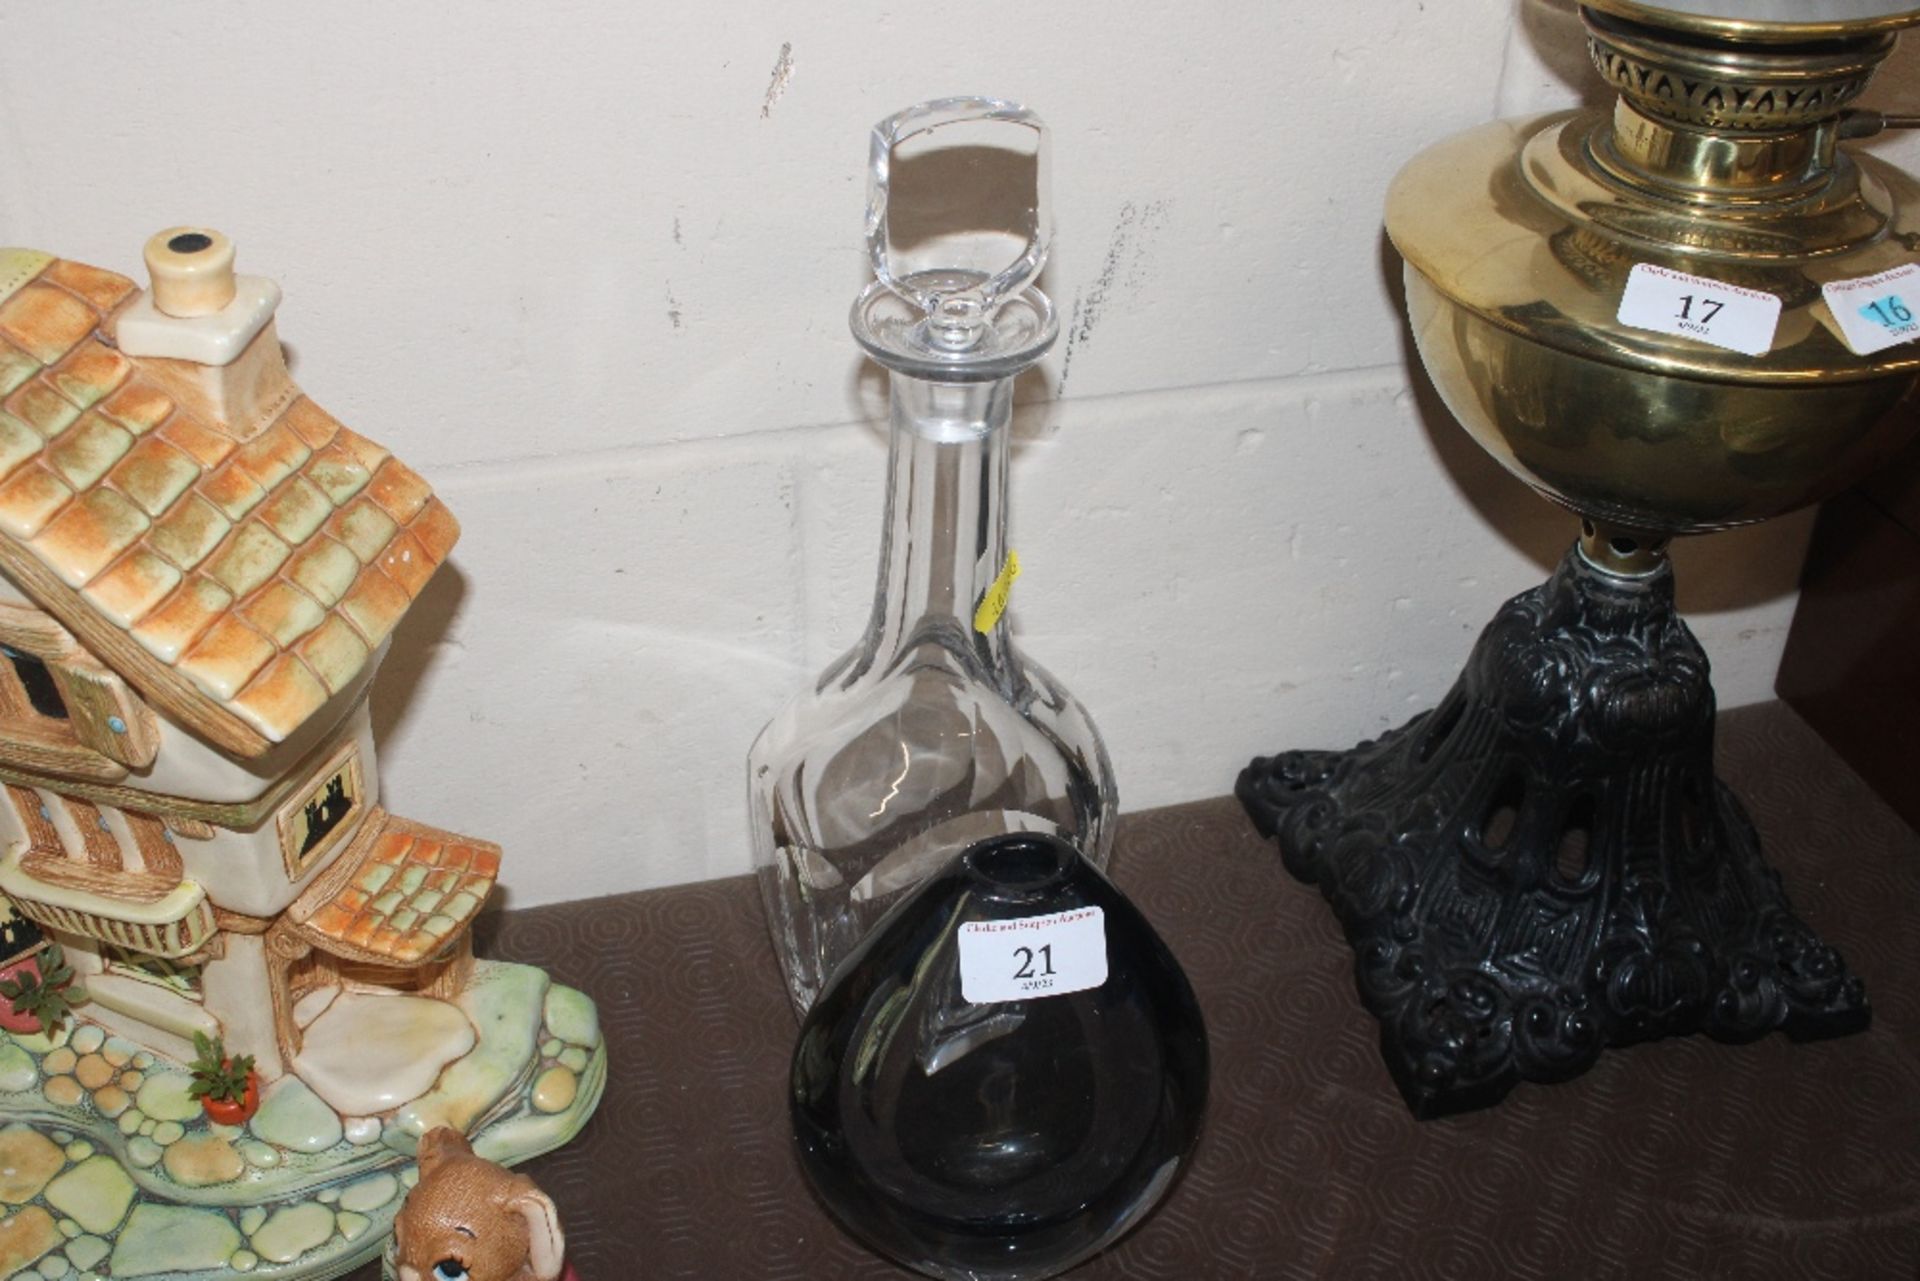 An Orrefors glass decanter with Masonic decoration